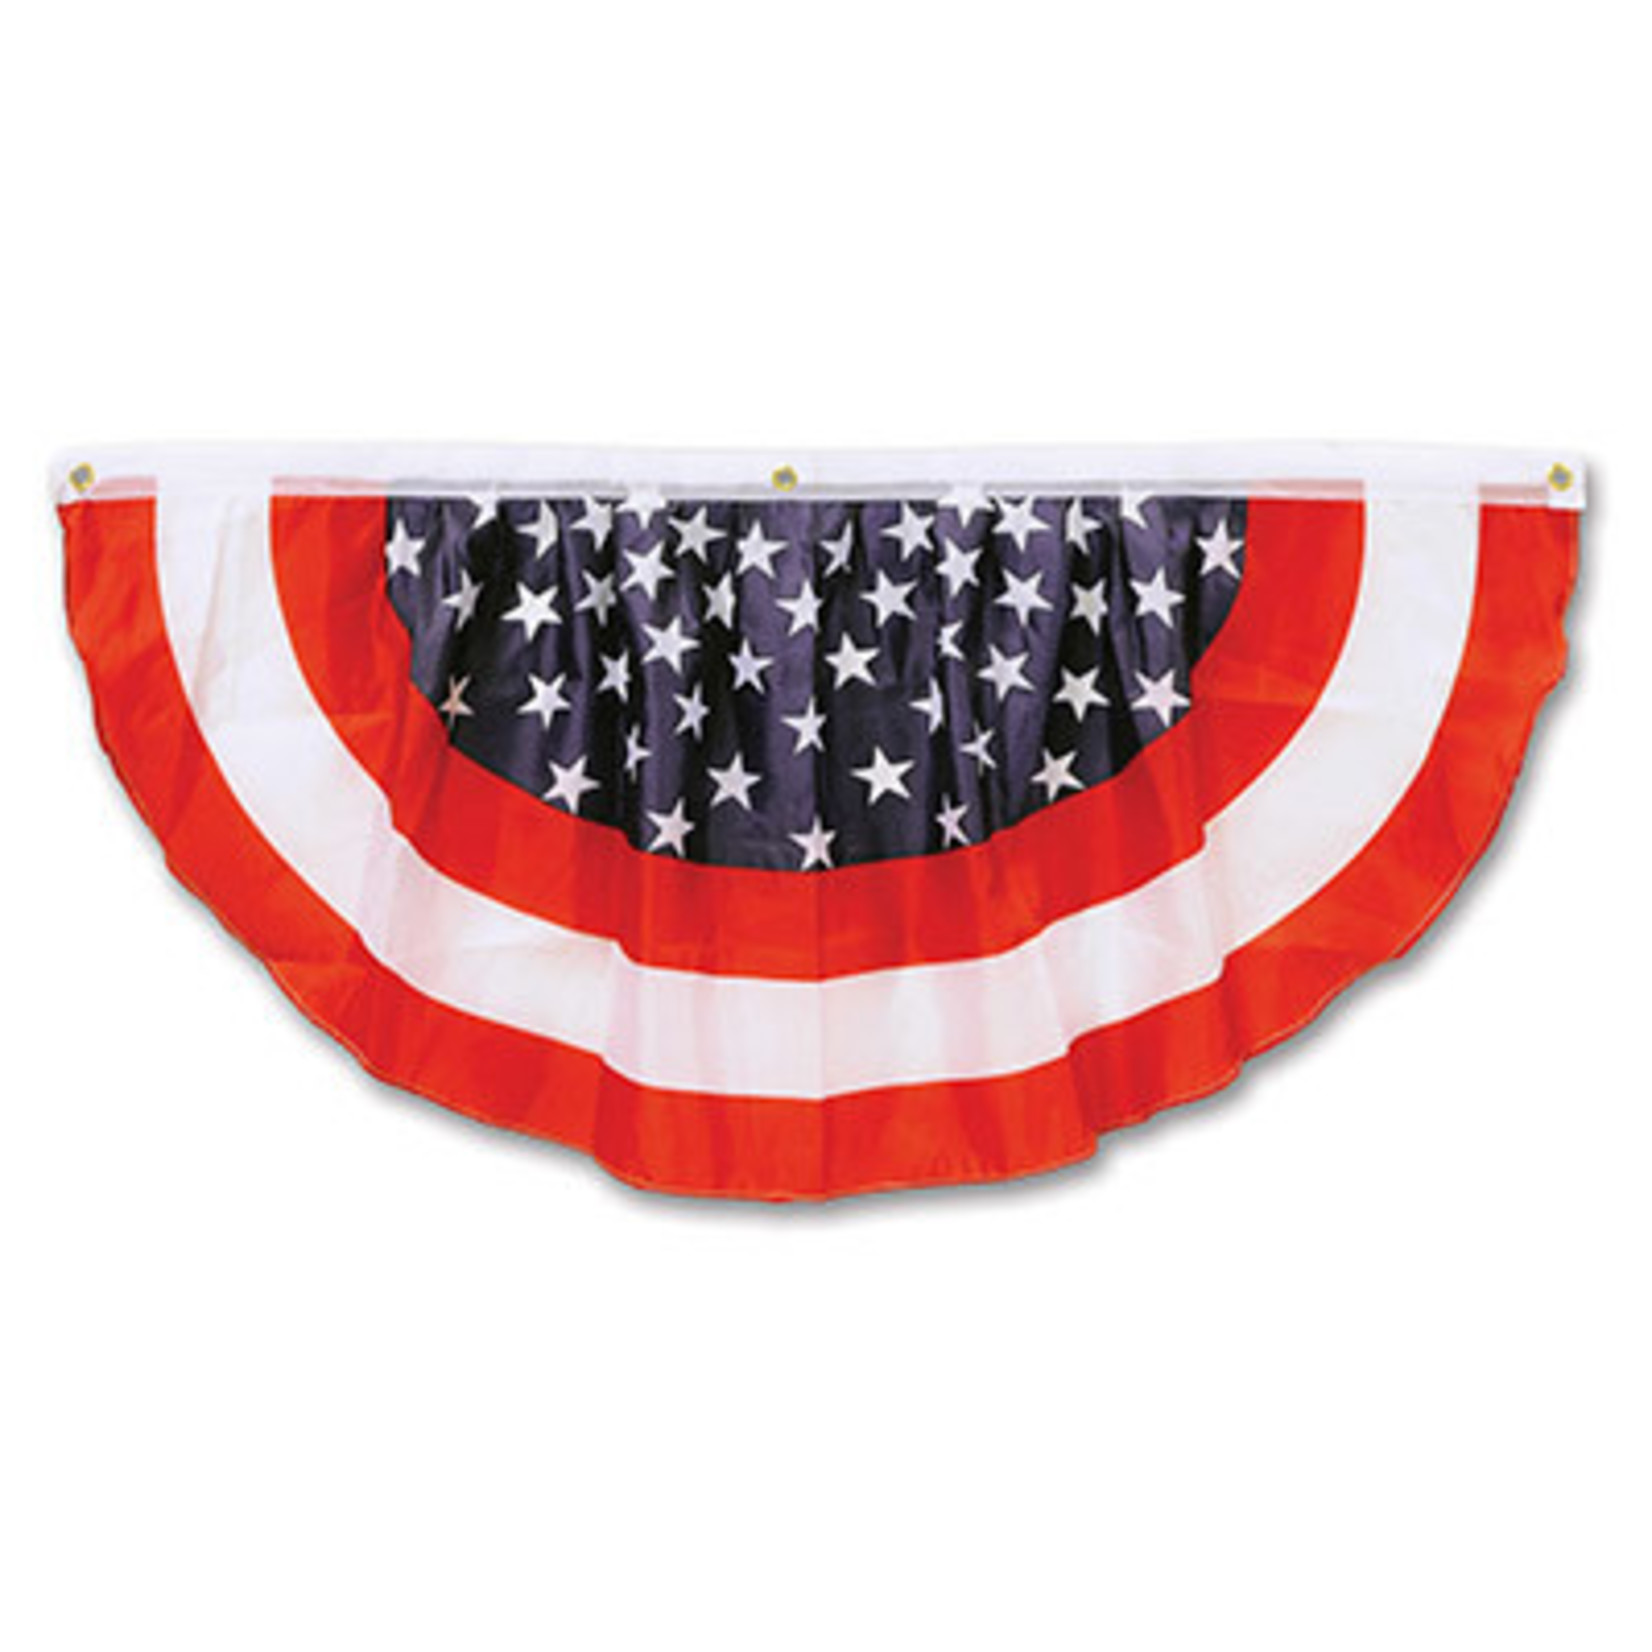 Beistle Stars & Stripes Fabric Bunting  - 4ft.